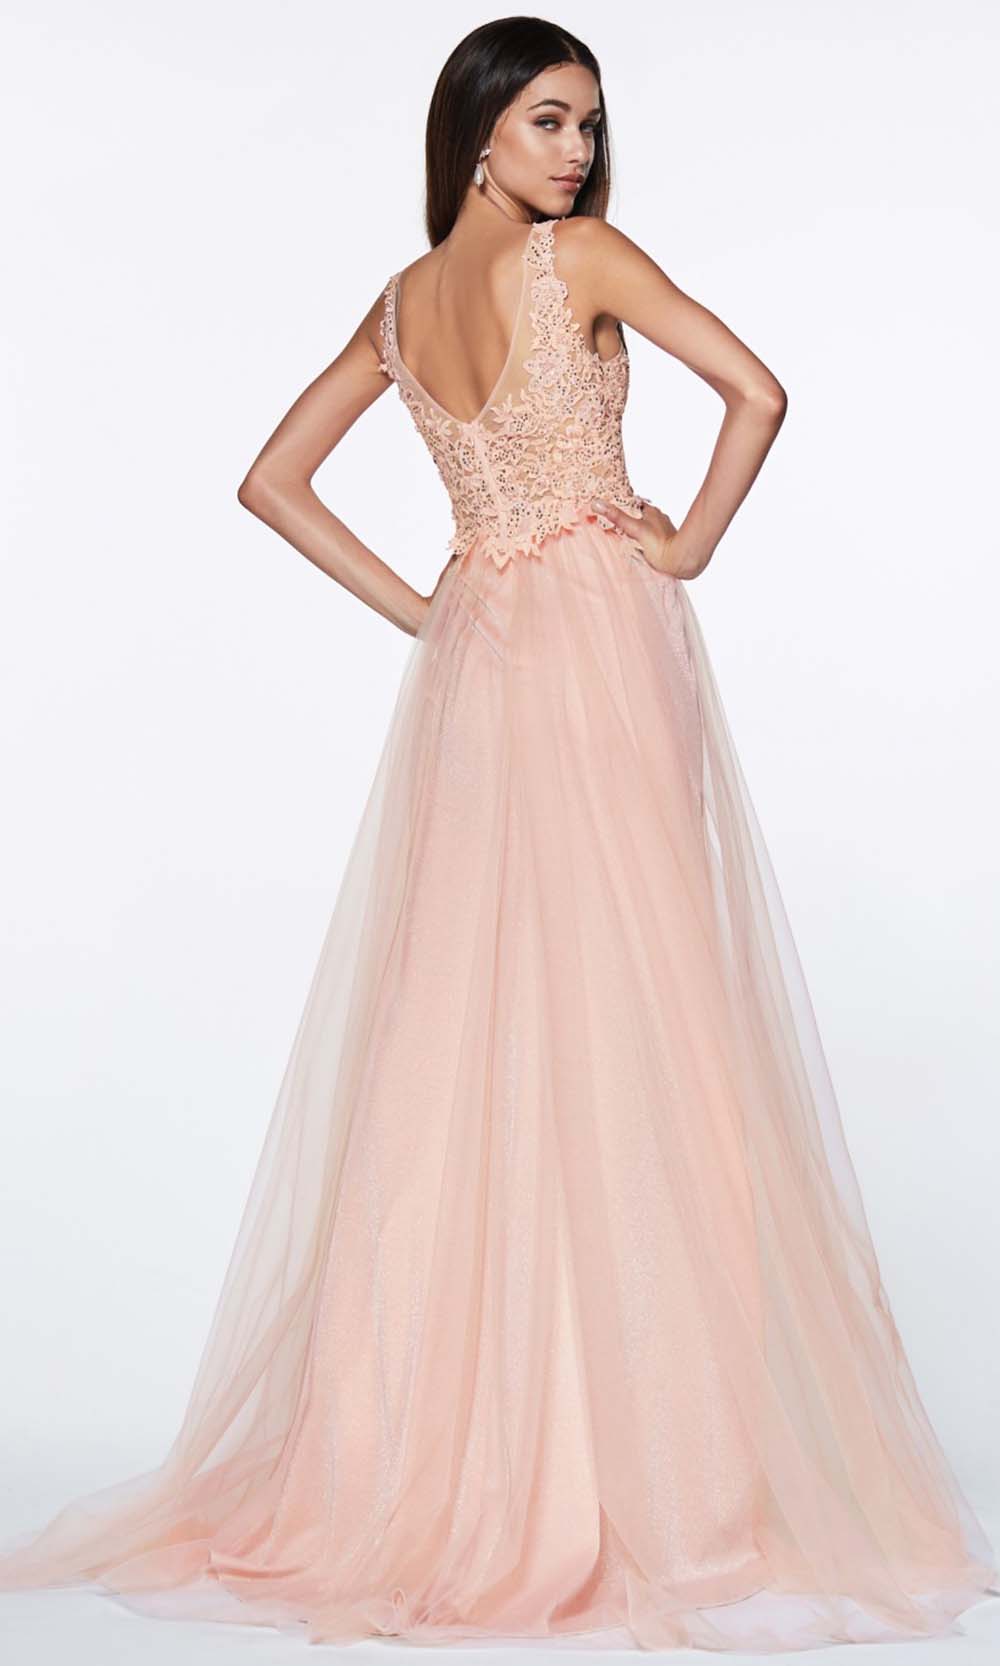 Cinderella Divine - KV1040 Jeweled Lace Gown In Pink